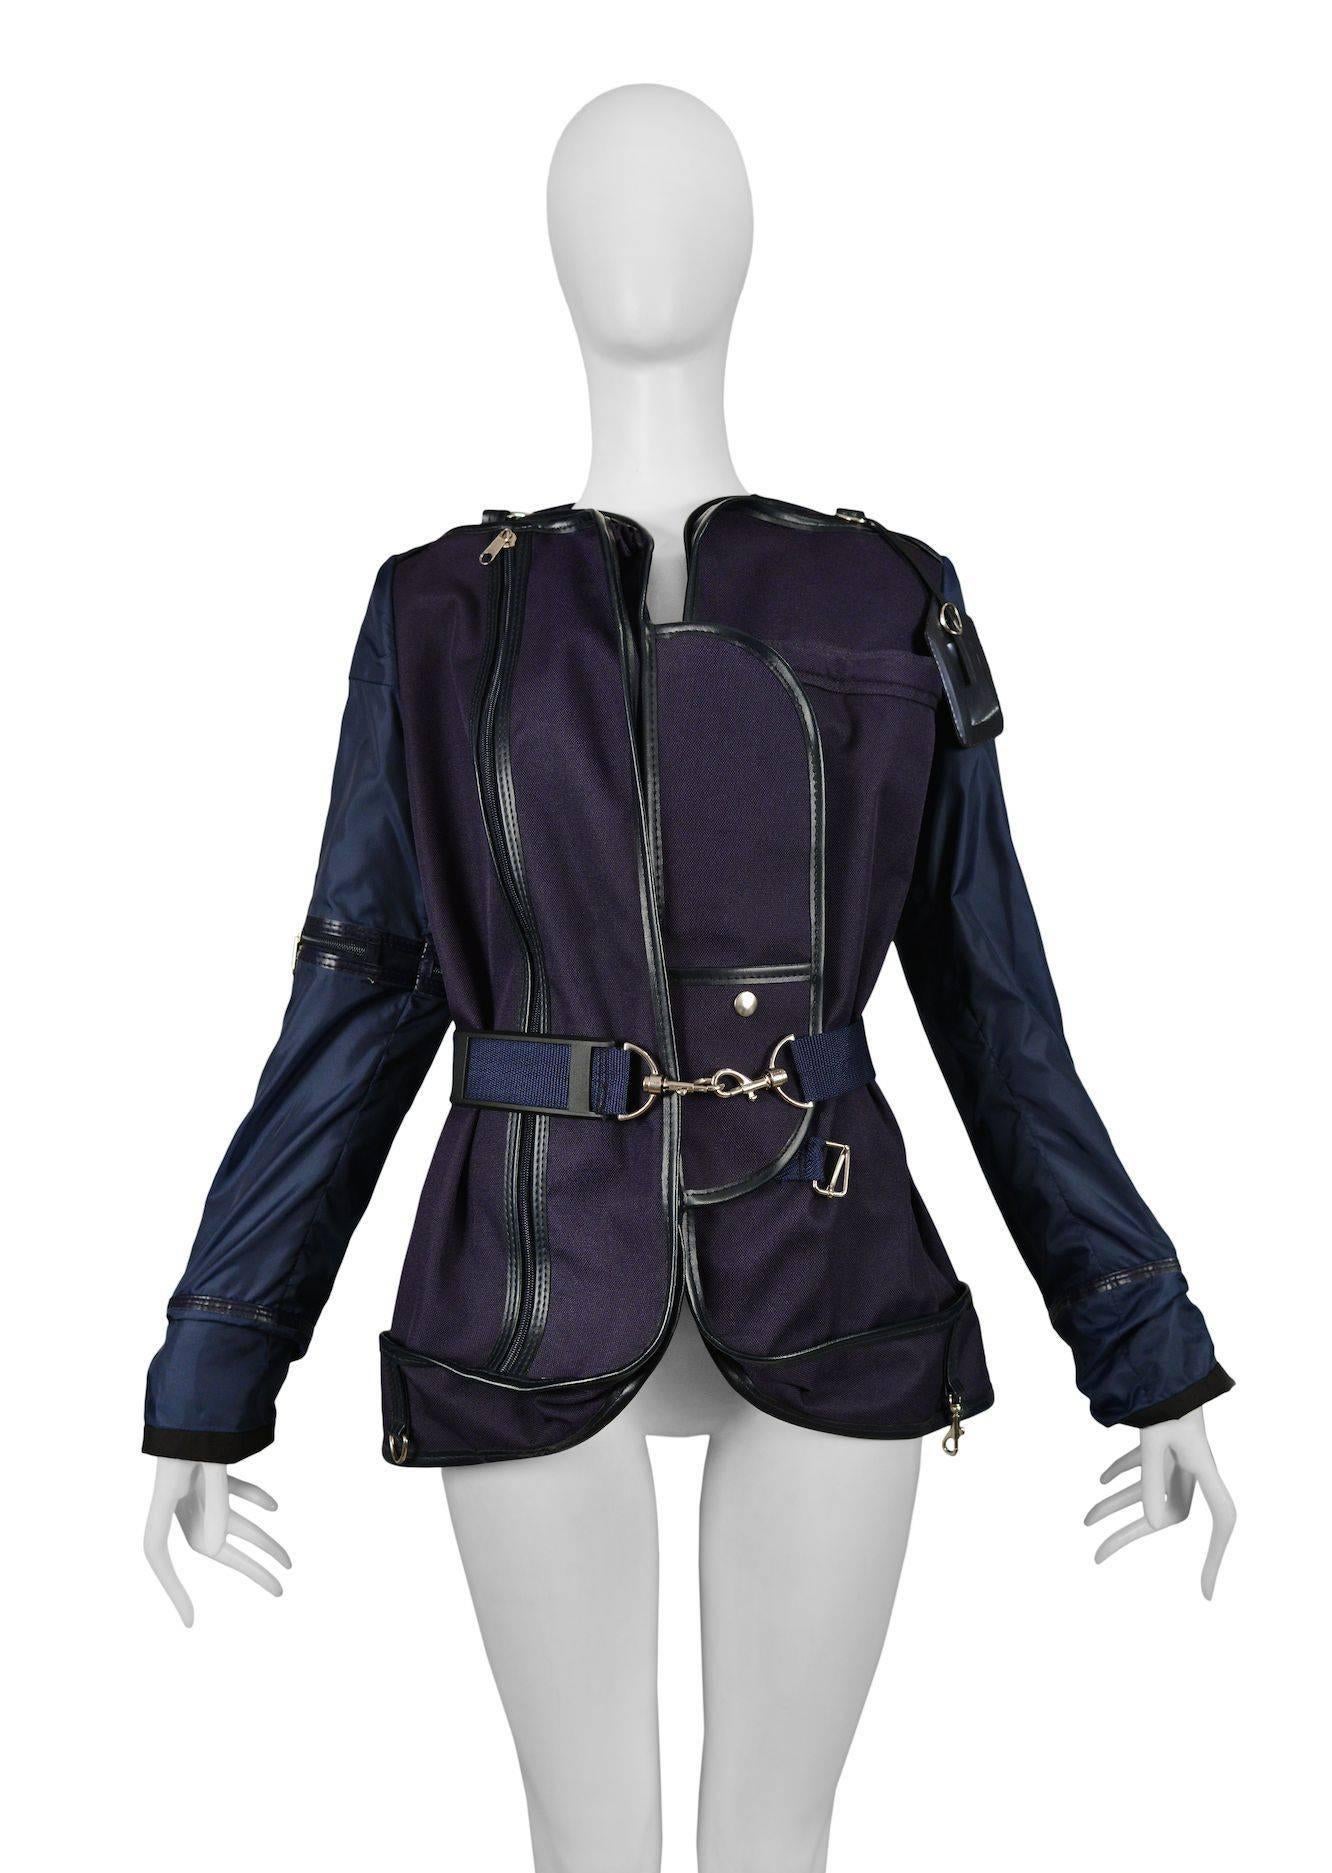 Vintage Maison Martin Margiela Couture Artisanal Garment Bag Jacket. A jacket made of navy blue garment bags. Buckles and straps throughout. ID tag at neck. Runway piece from the Spring / Summer 2007 Couture Collection.